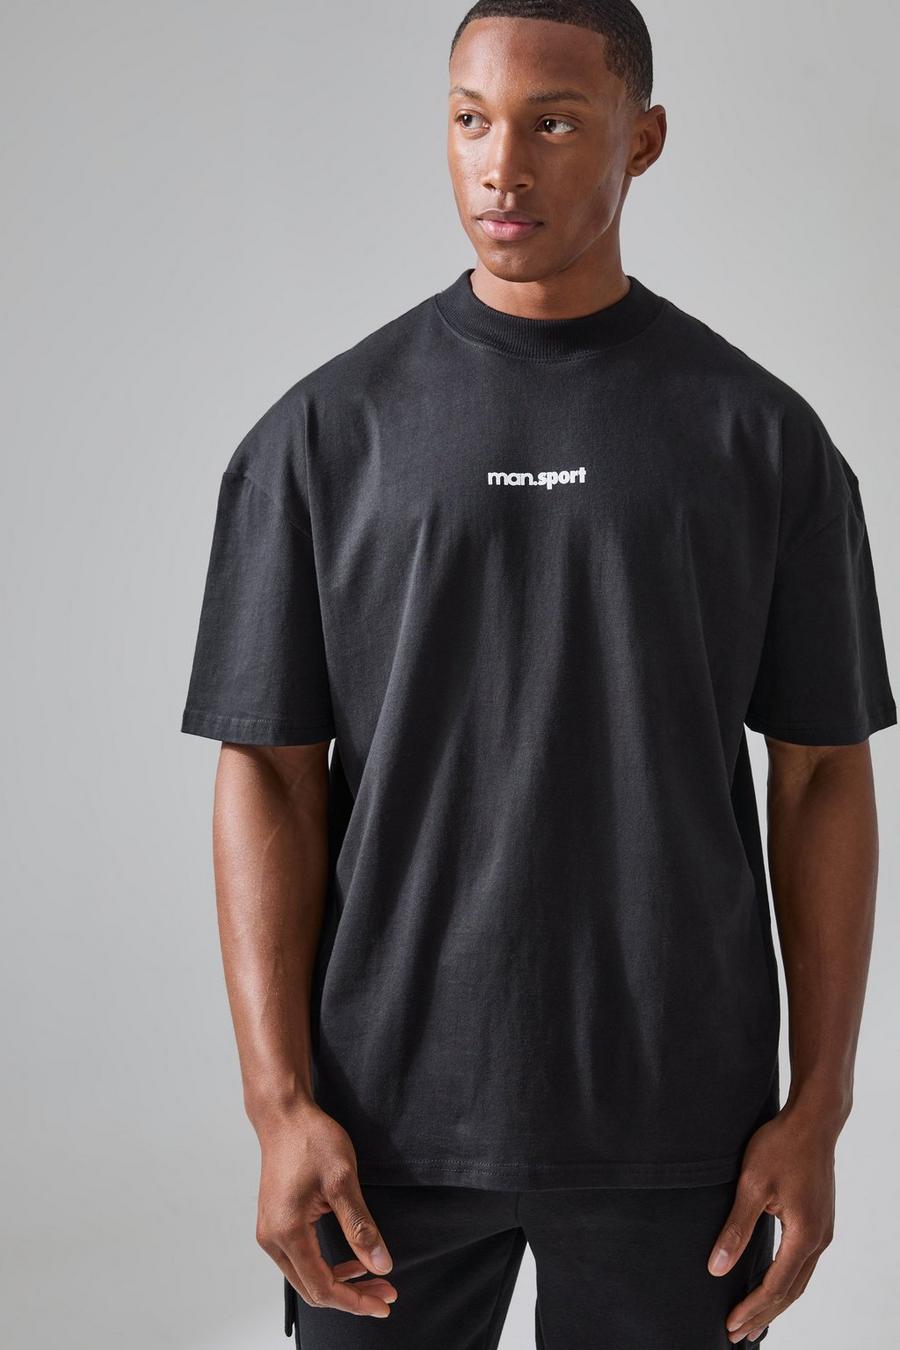 Man Active Oversized One More Rep T-shirt, Black